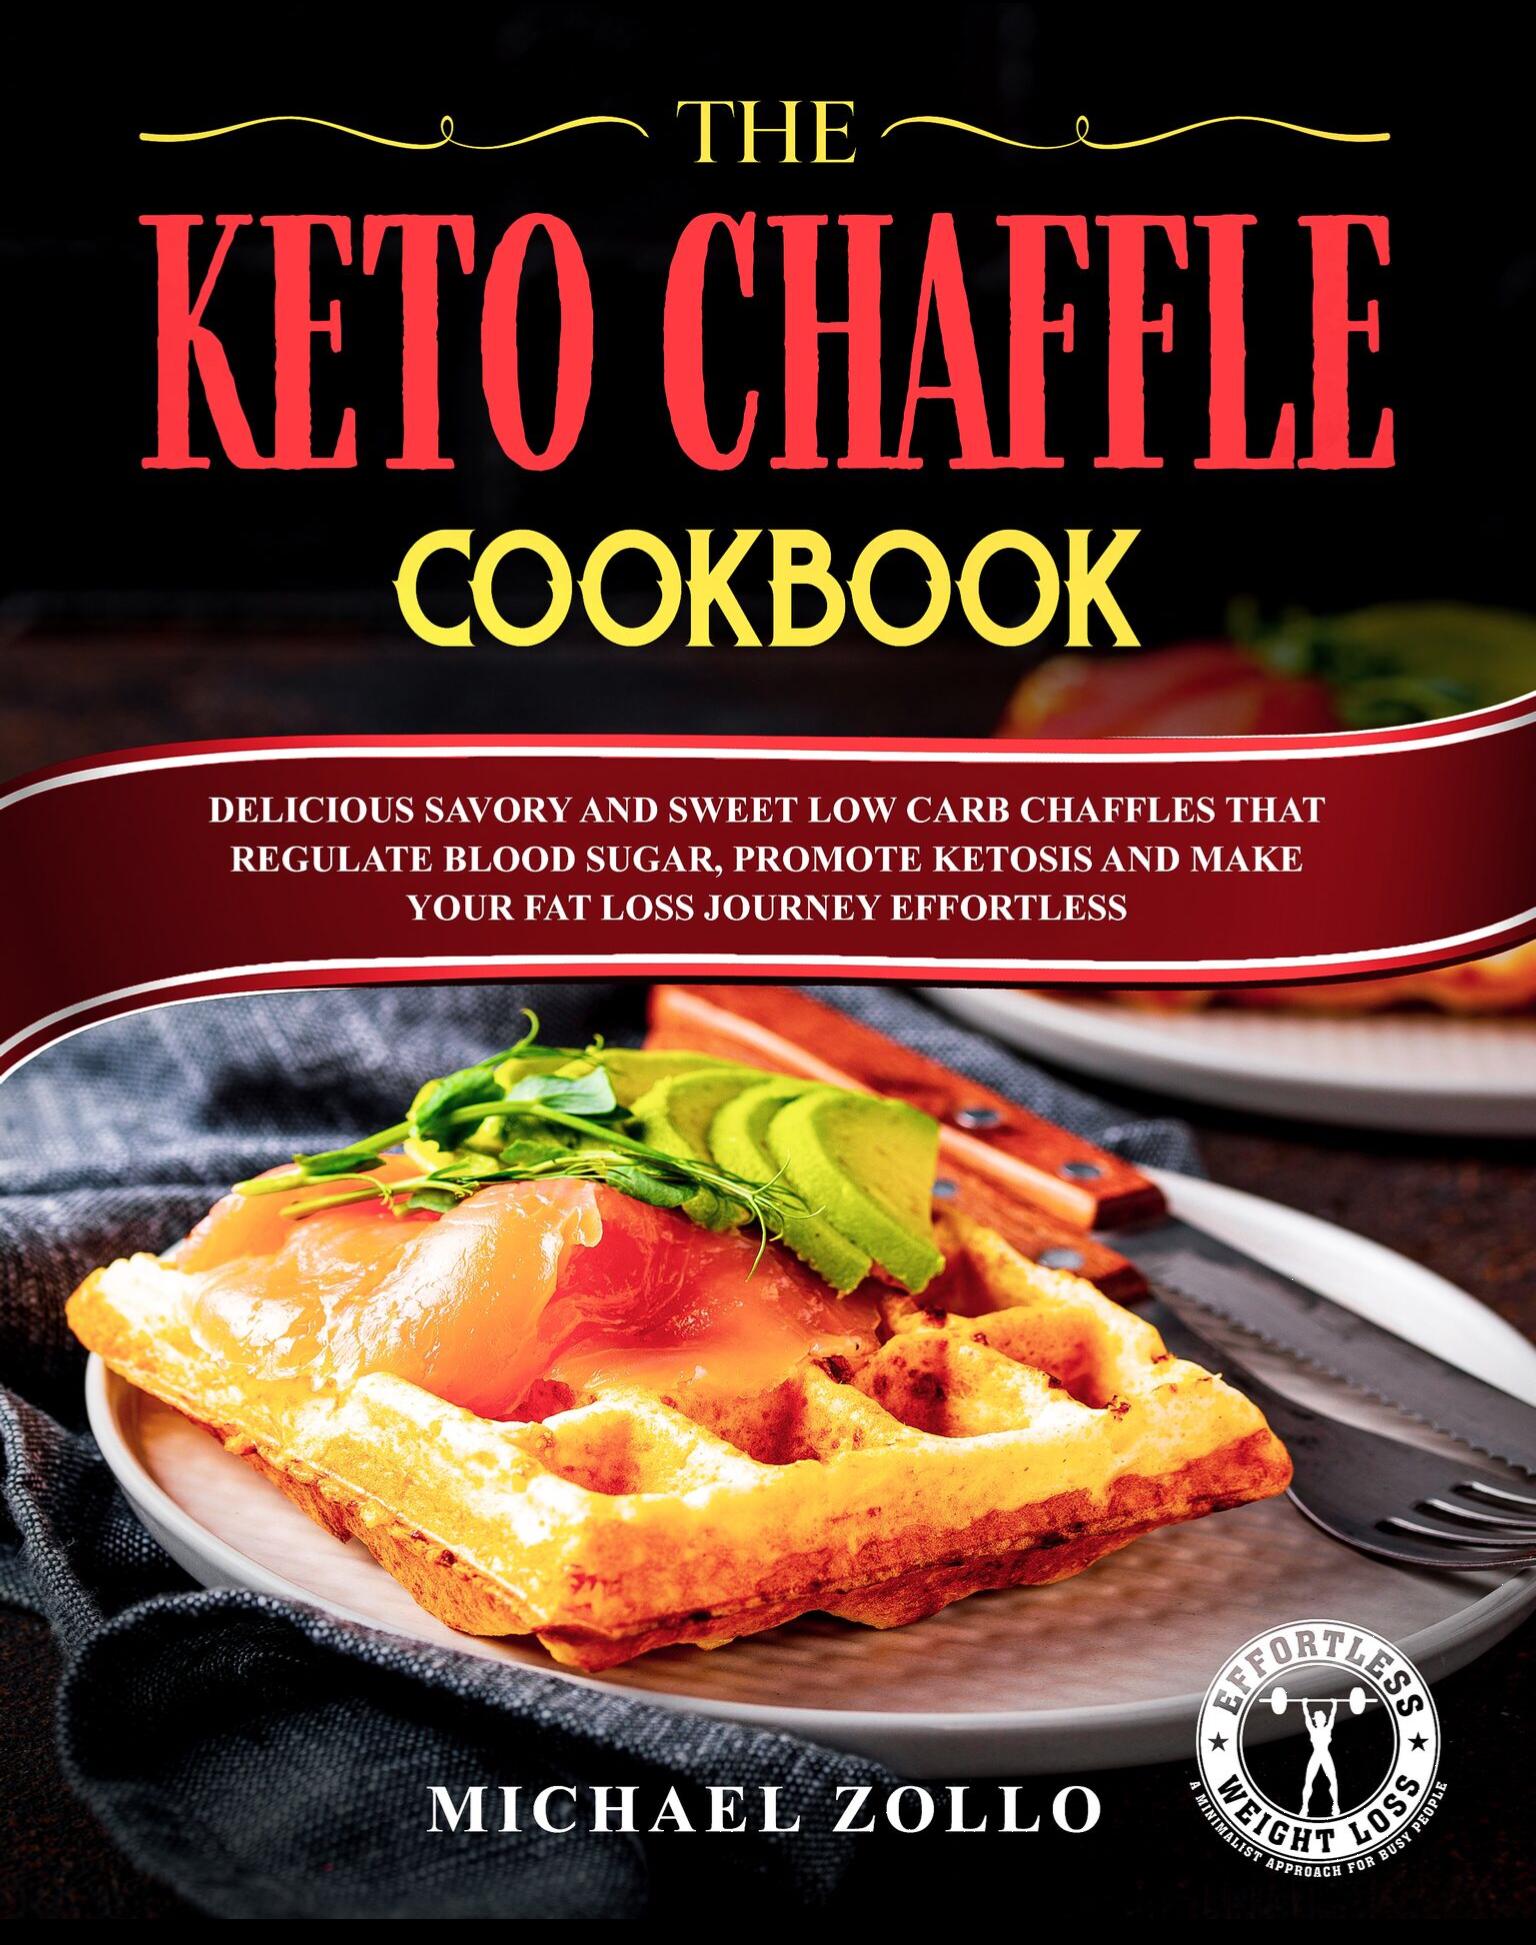 ARC for The Keto chaffle cookbook by Michael Zollo on Booksprout